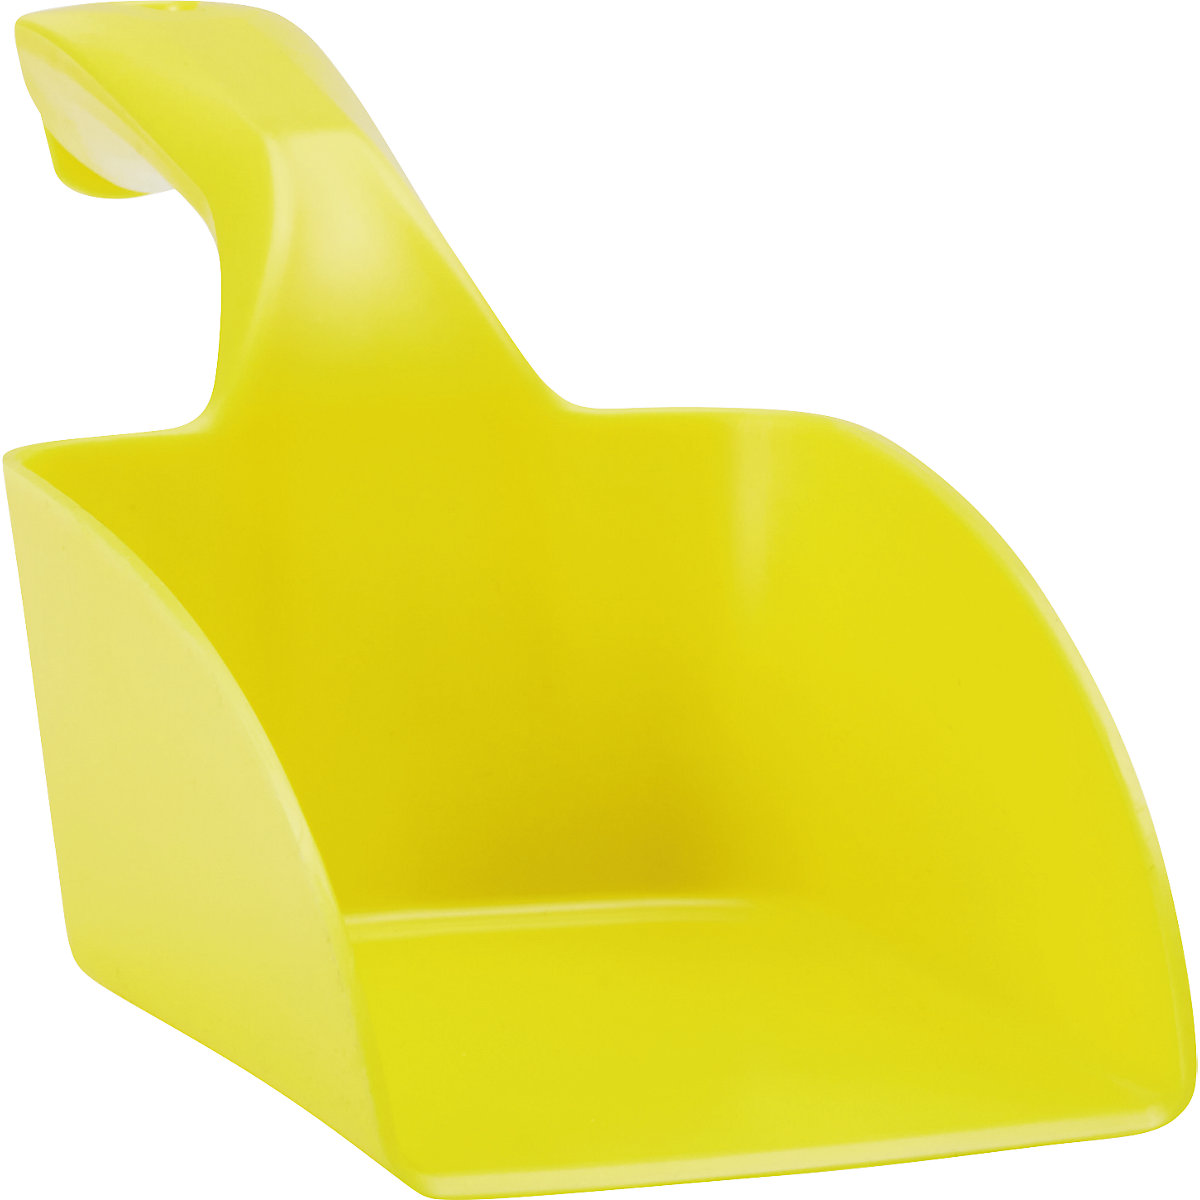 Hand shovel, suitable for foodstuffs – Vikan, capacity 1 l, pack of 12, yellow